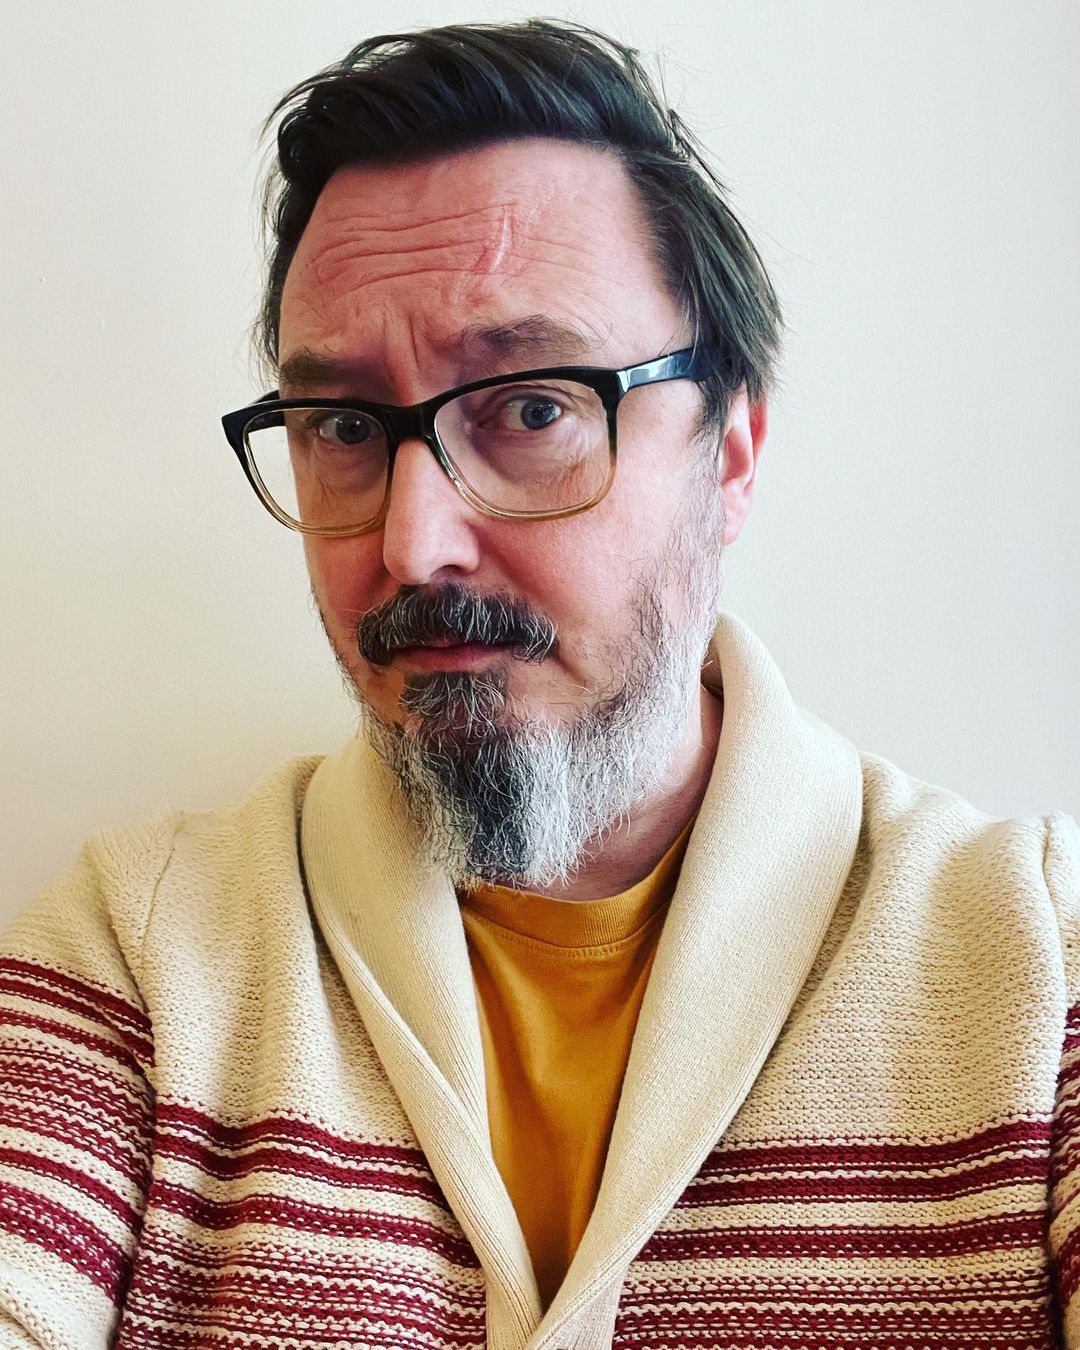 Dr. Shawlneck Waffleknit (my personal physician who is also my sweater) and I wish to remind you that the Judge John Hodgman podcasts runs on YOUR BEEFS. Have a real life dispute with your partner, roommate, neighbor, co-worker, pet? Send it in to...